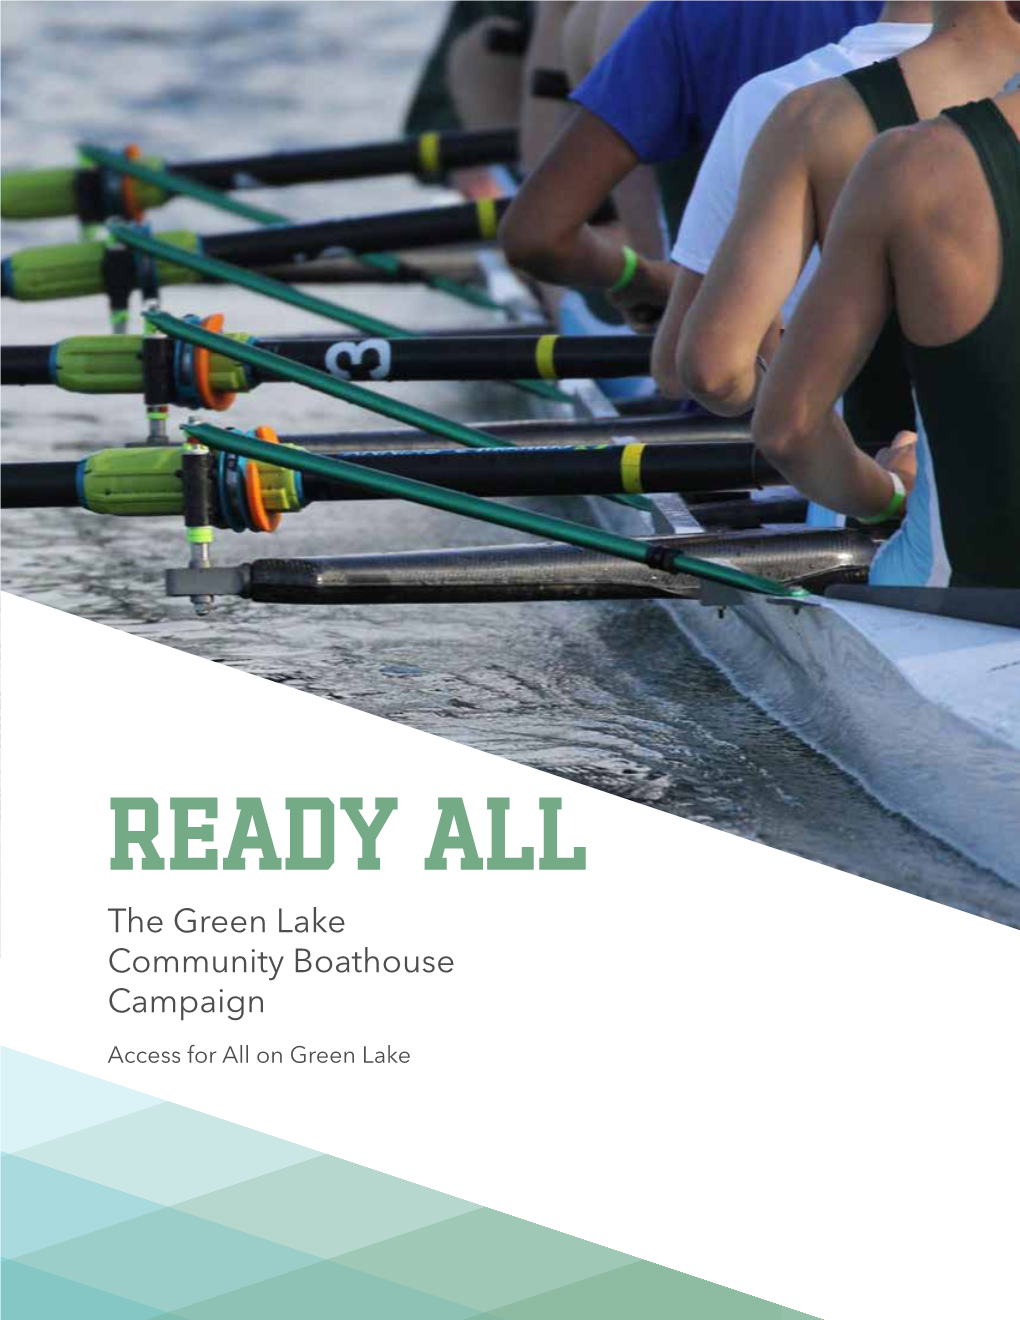 READY ALL the Green Lake Community Boathouse Campaign Access for All on Green Lake